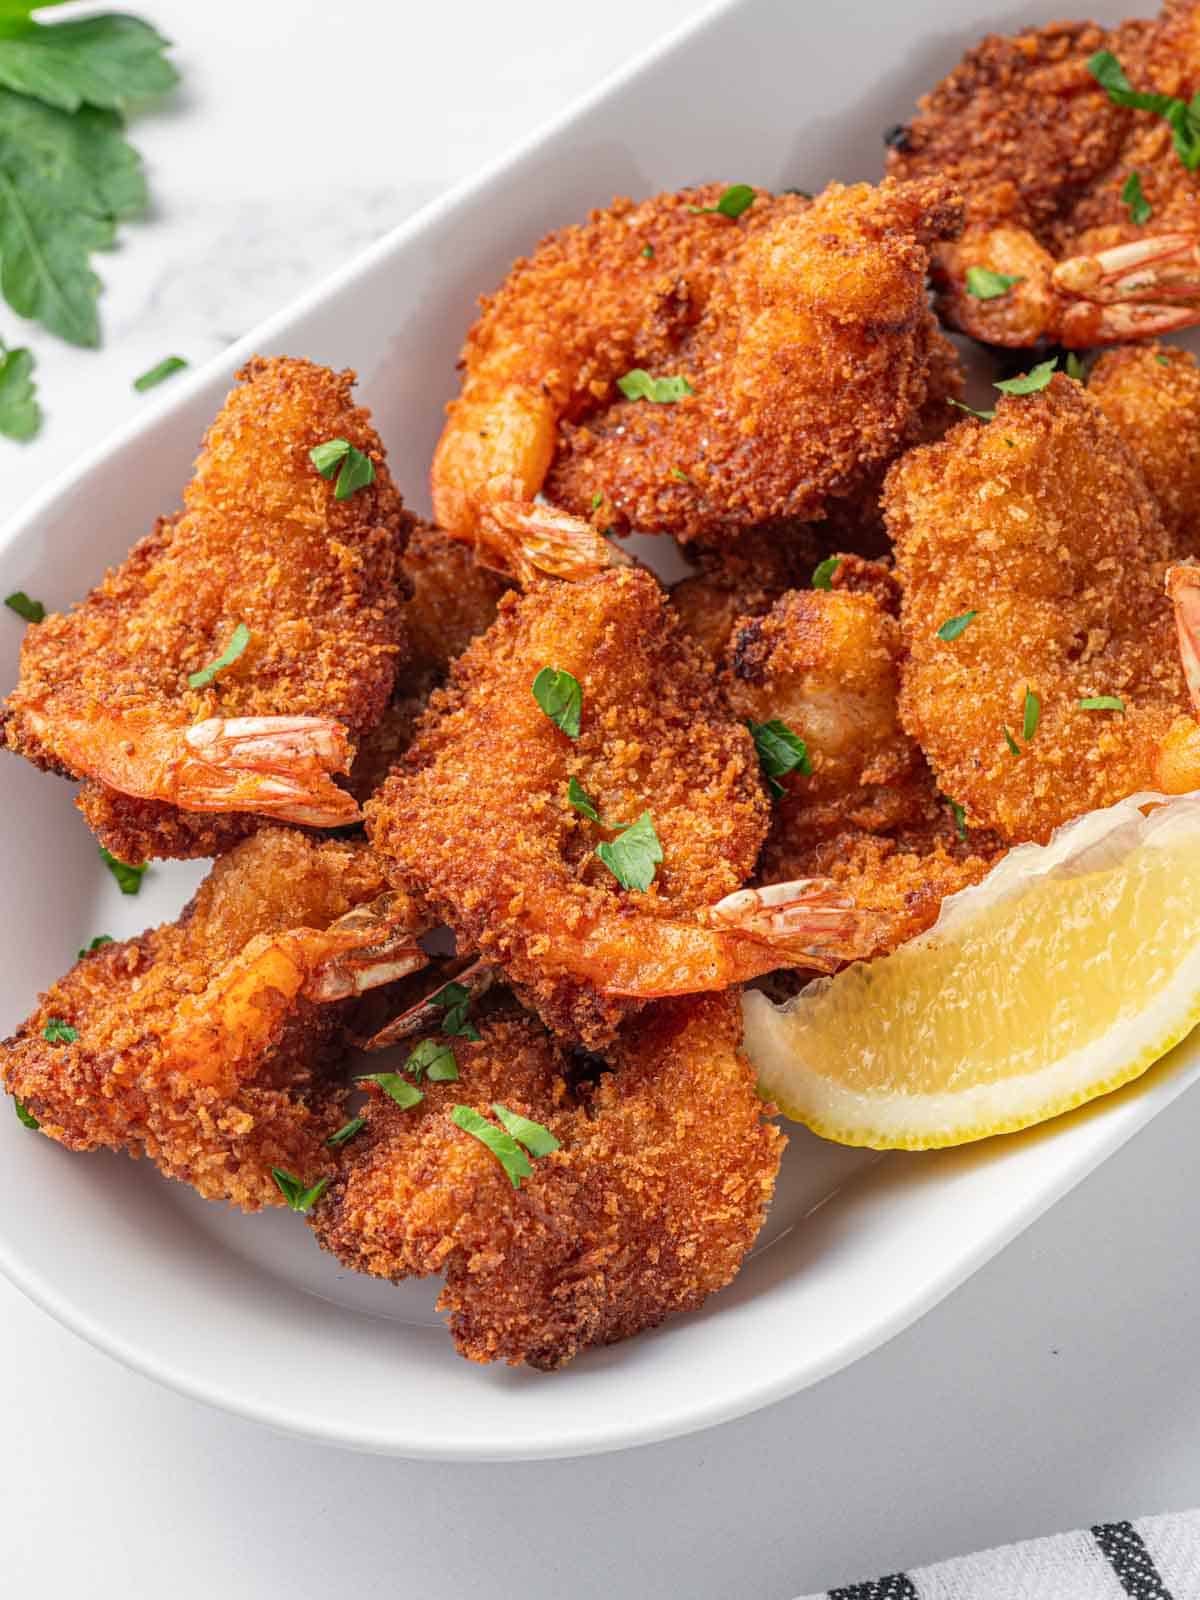 Closeup of fried butterfly shrimp.